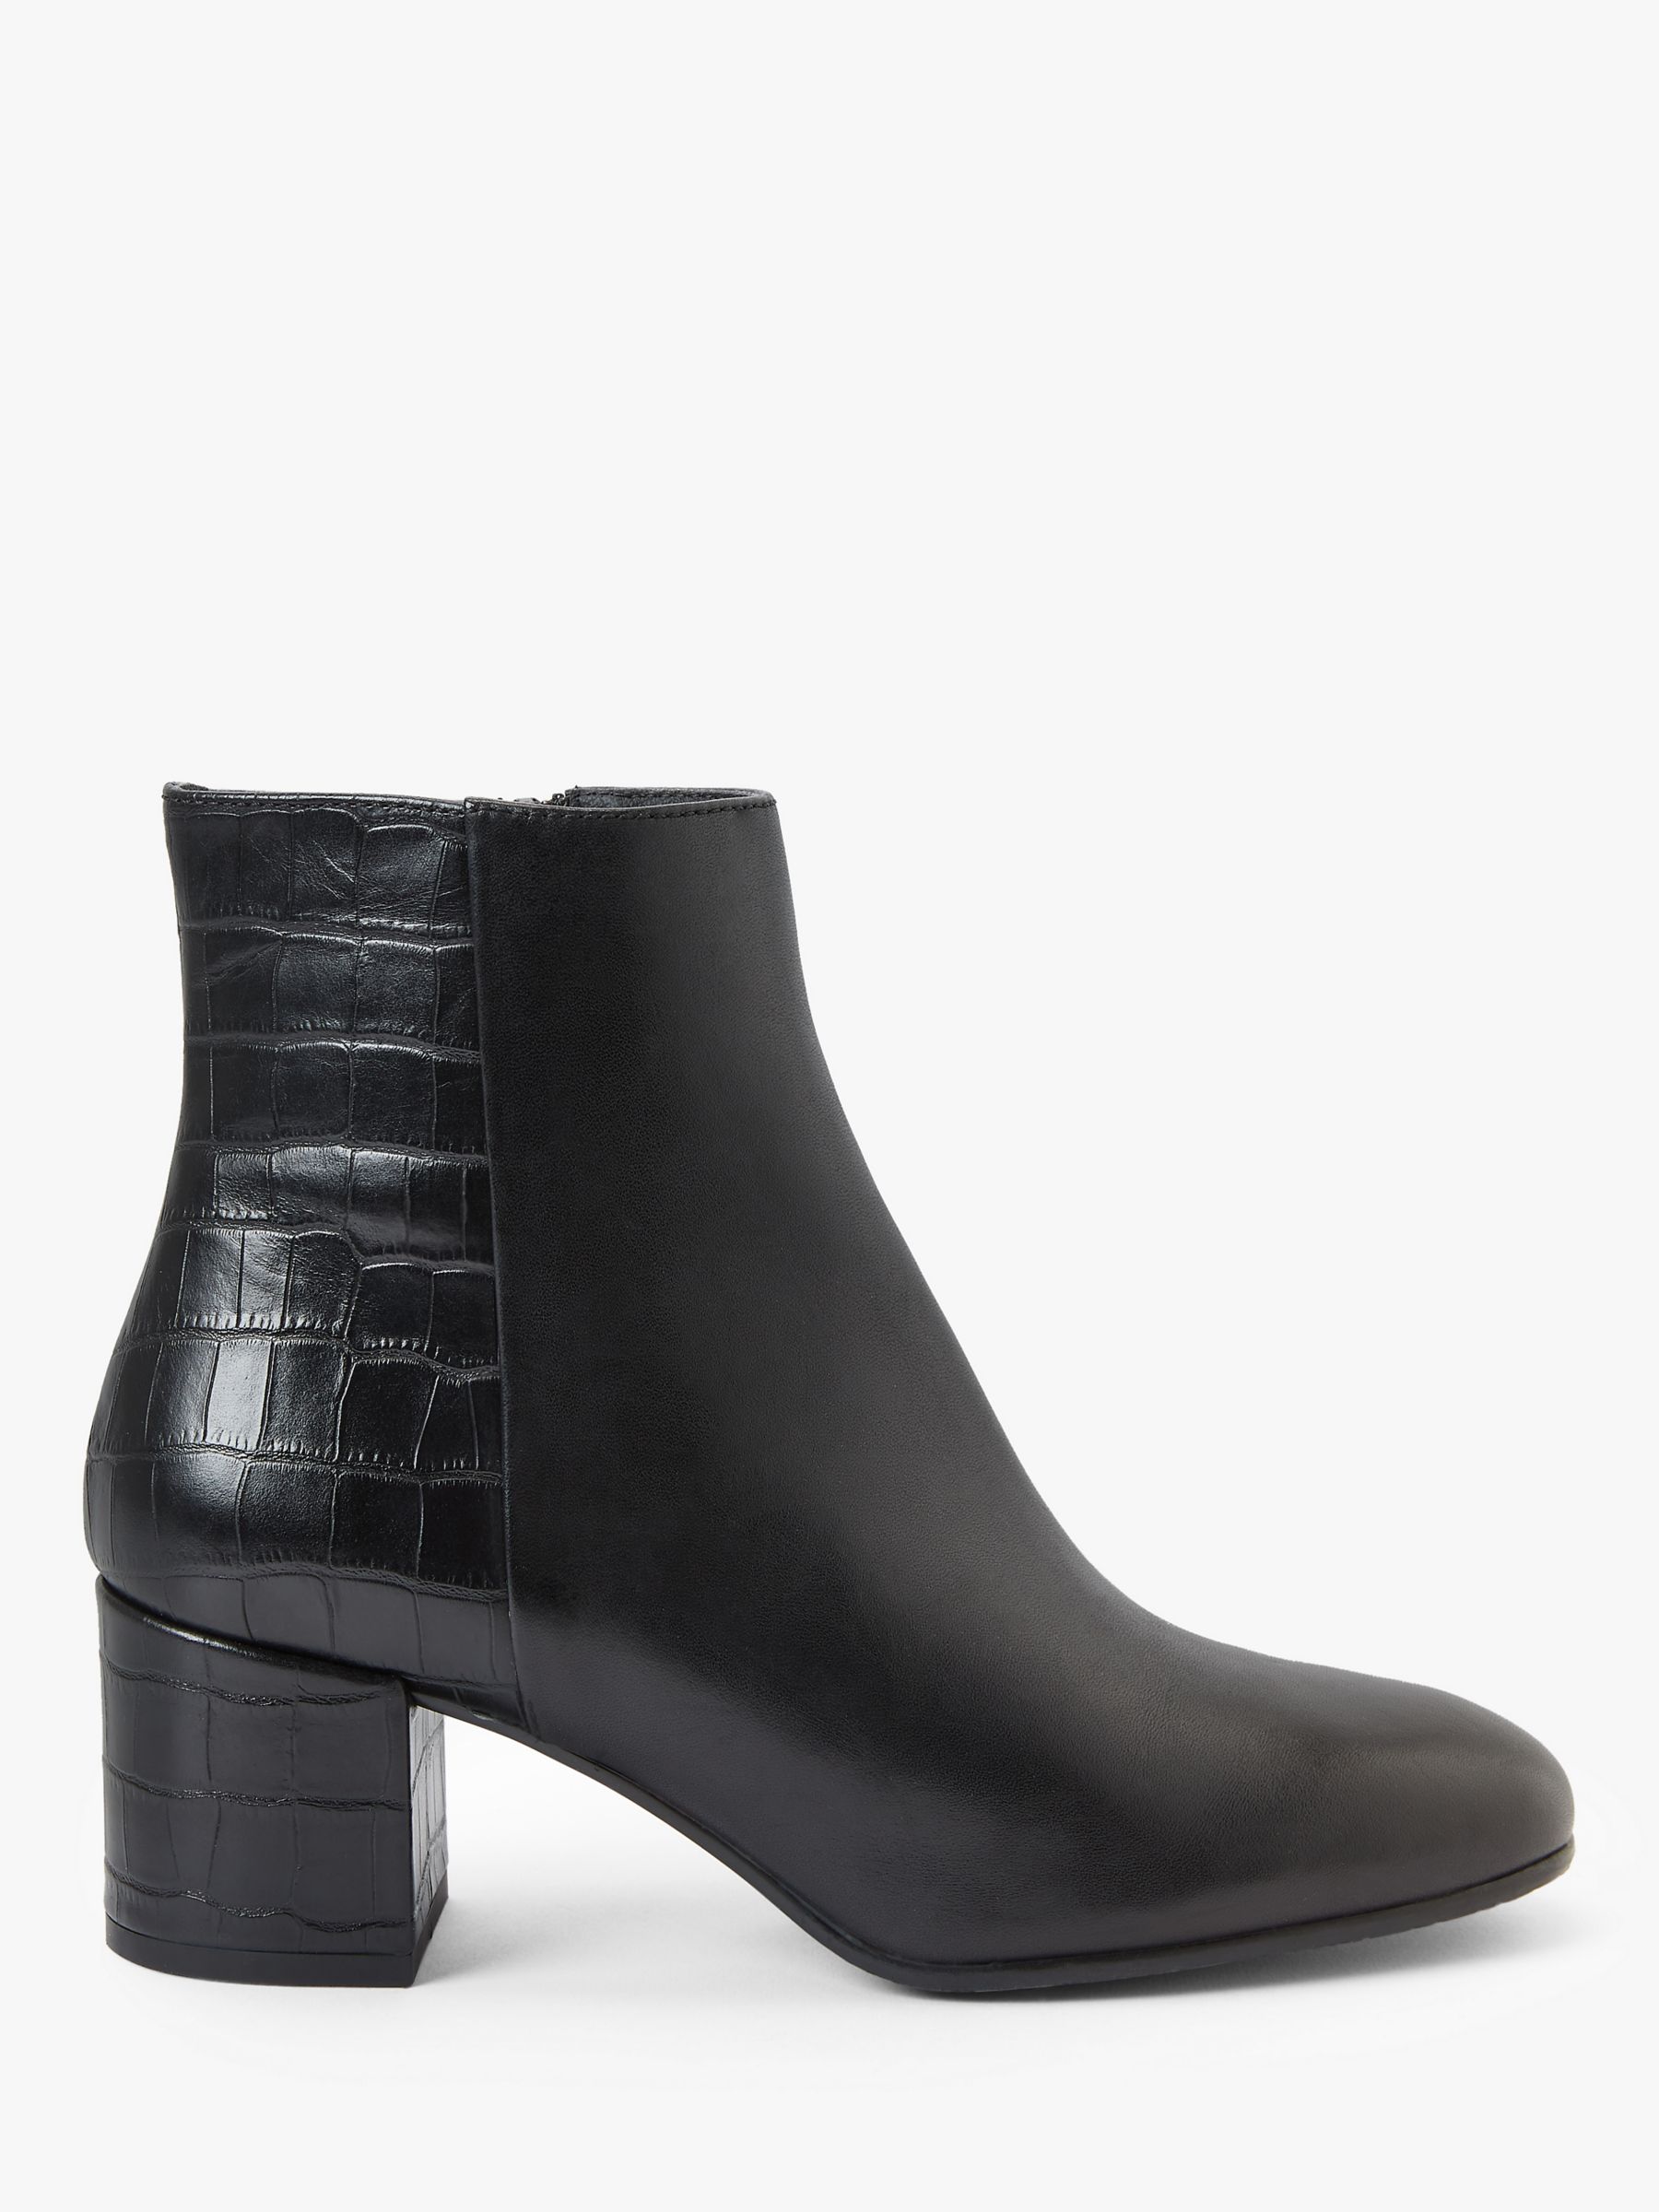 John Lewis & Partners Post Croc Print Leather Ankle Boots, Black at ...